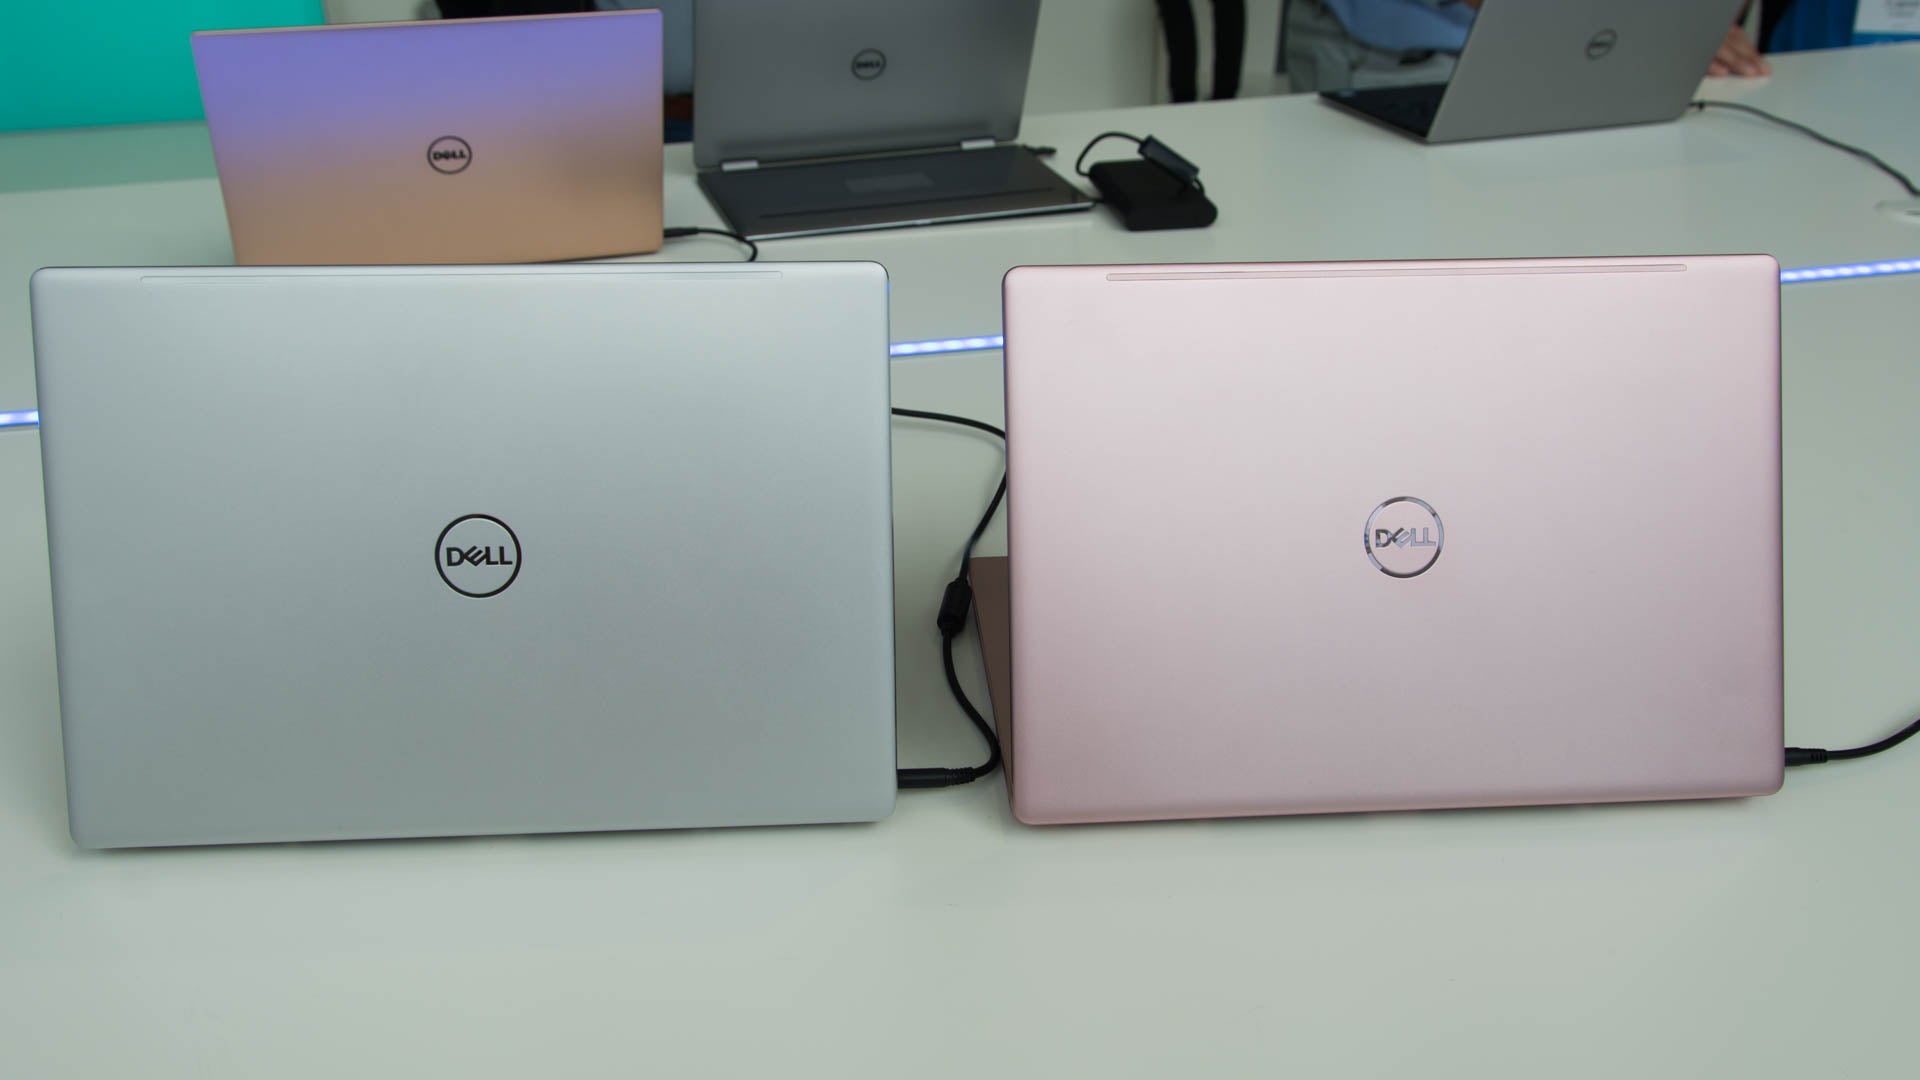 Dell Inspiron 13 7000 laptops in silver and rose gold.